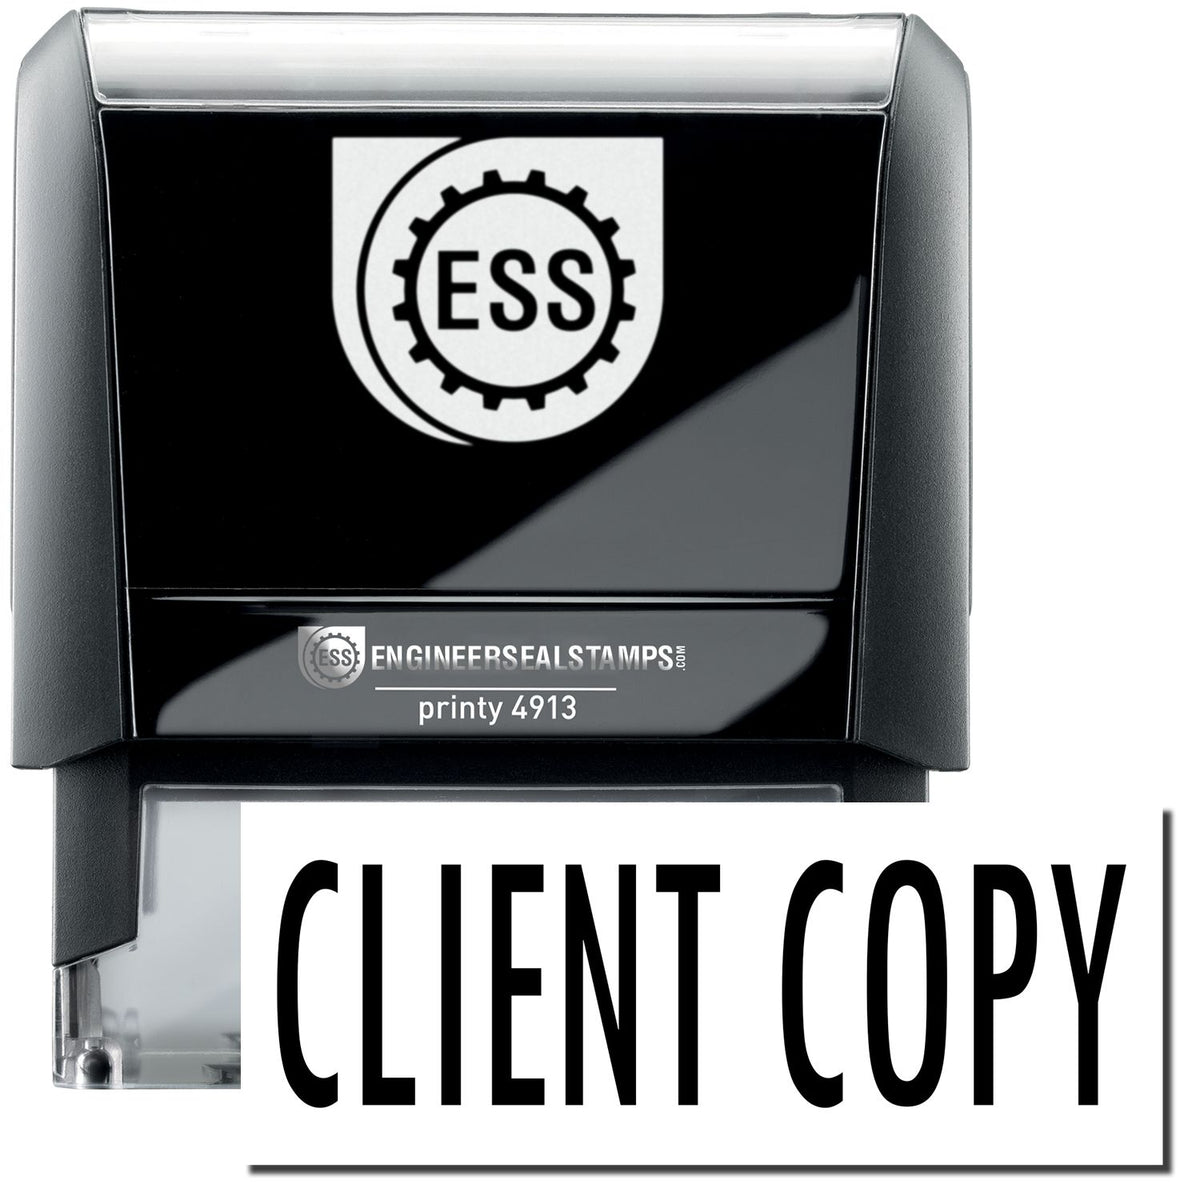 A large self-inking stamp with a stamped image showing how the text &quot;CLIENT COPY&quot; in a large bold font is displayed by it.